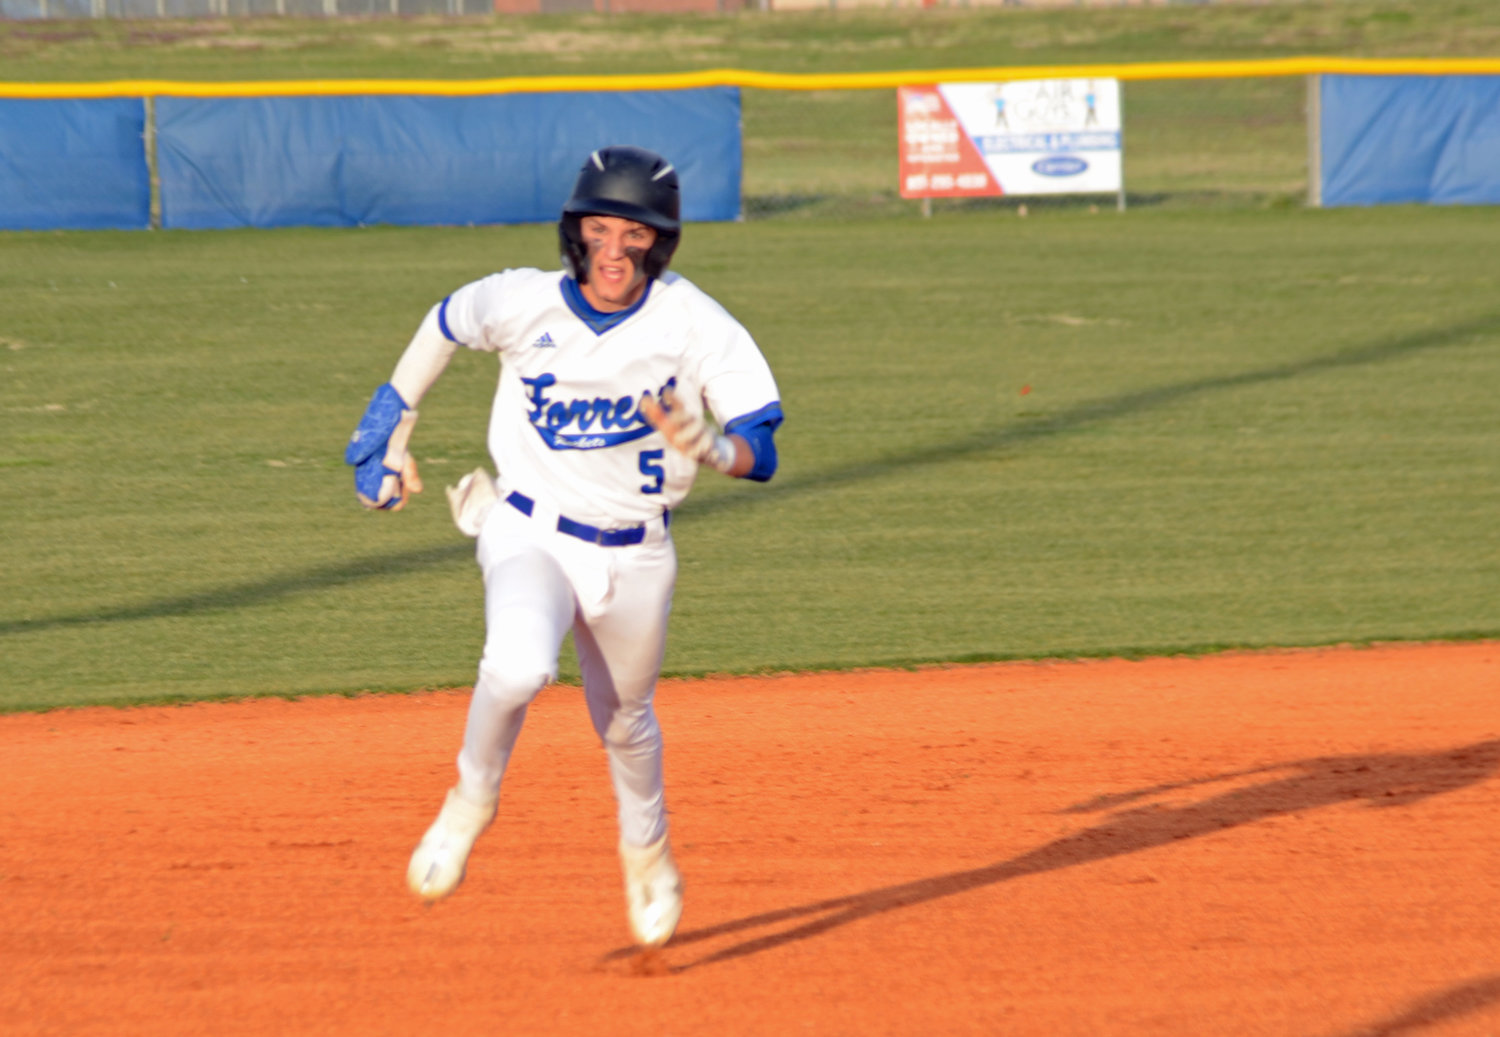 Forrest’s Camden Vaughn rounds second base and heads for third in the top of the first inning for the Rockets.